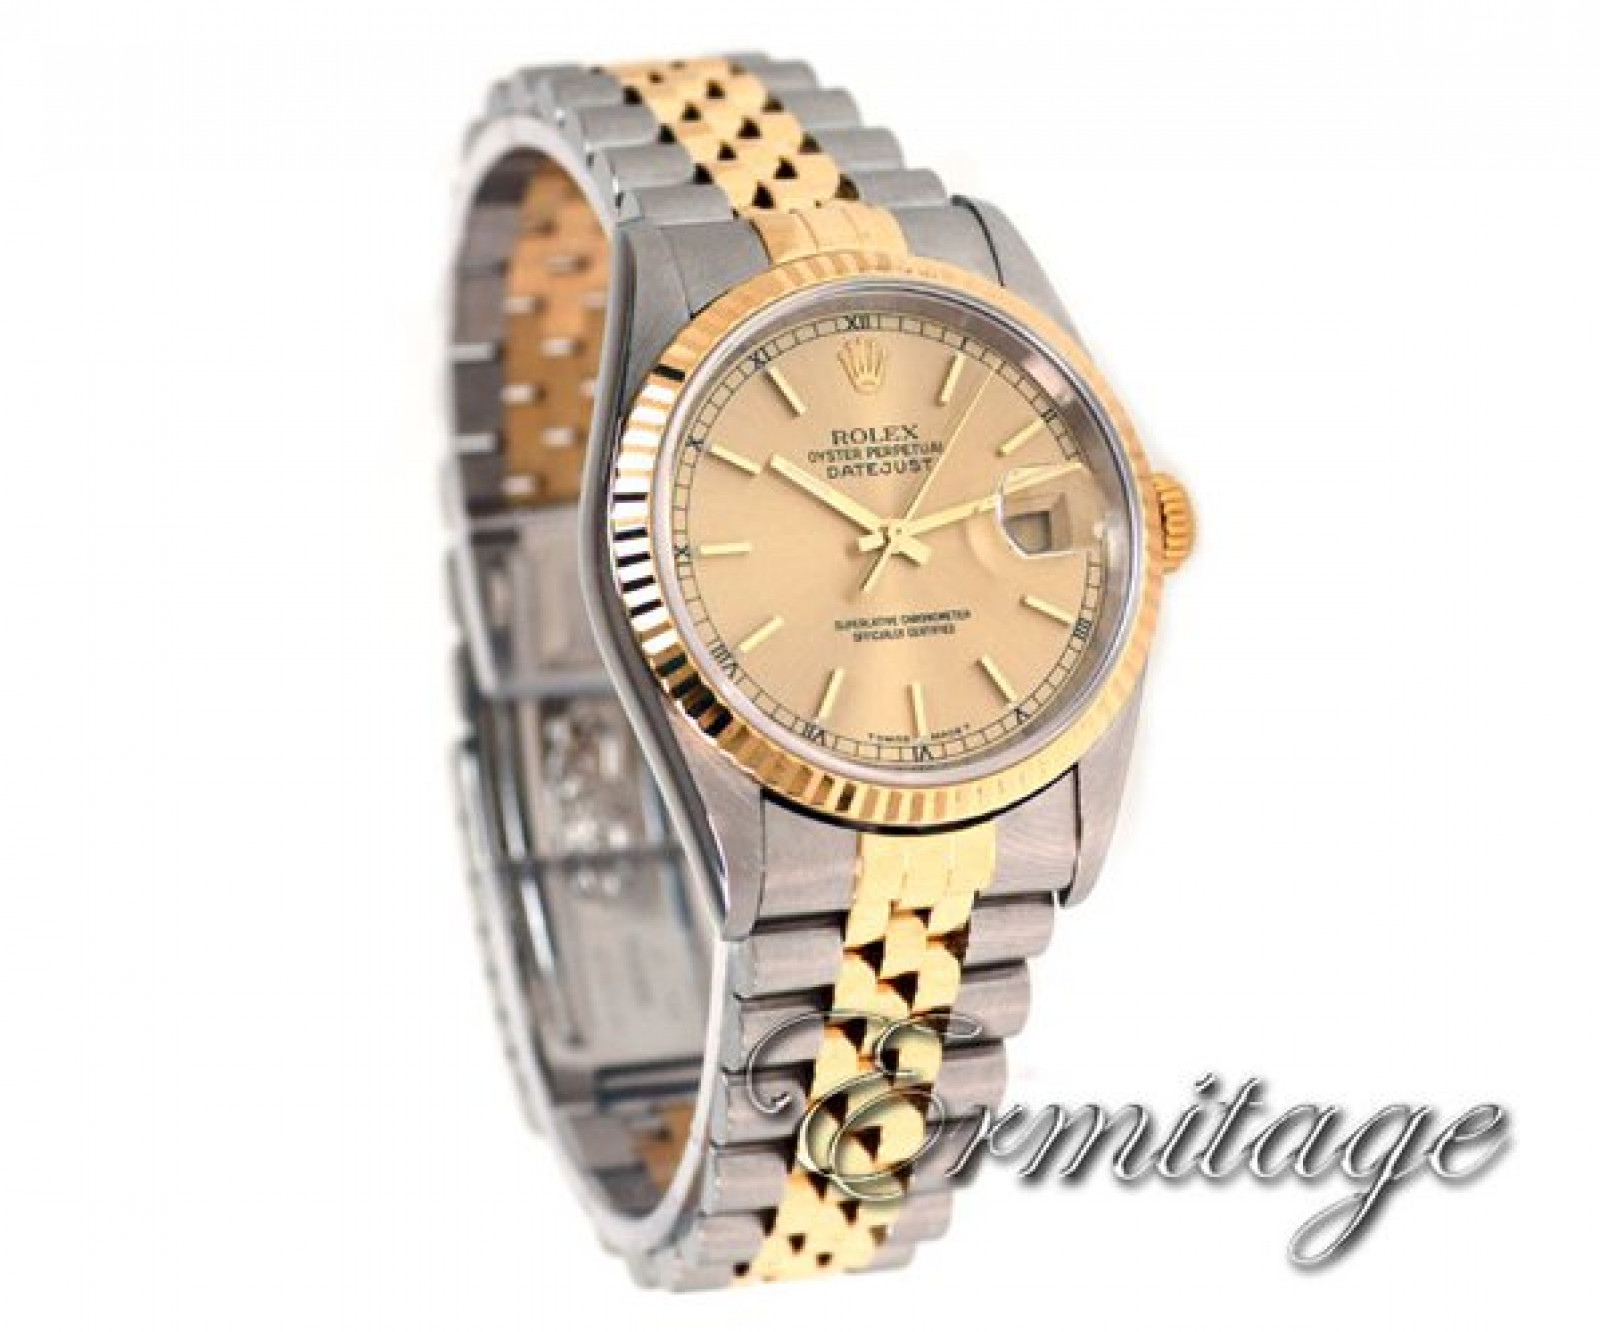 Rolex Datejust 16233 Oyster Perpetual 1997